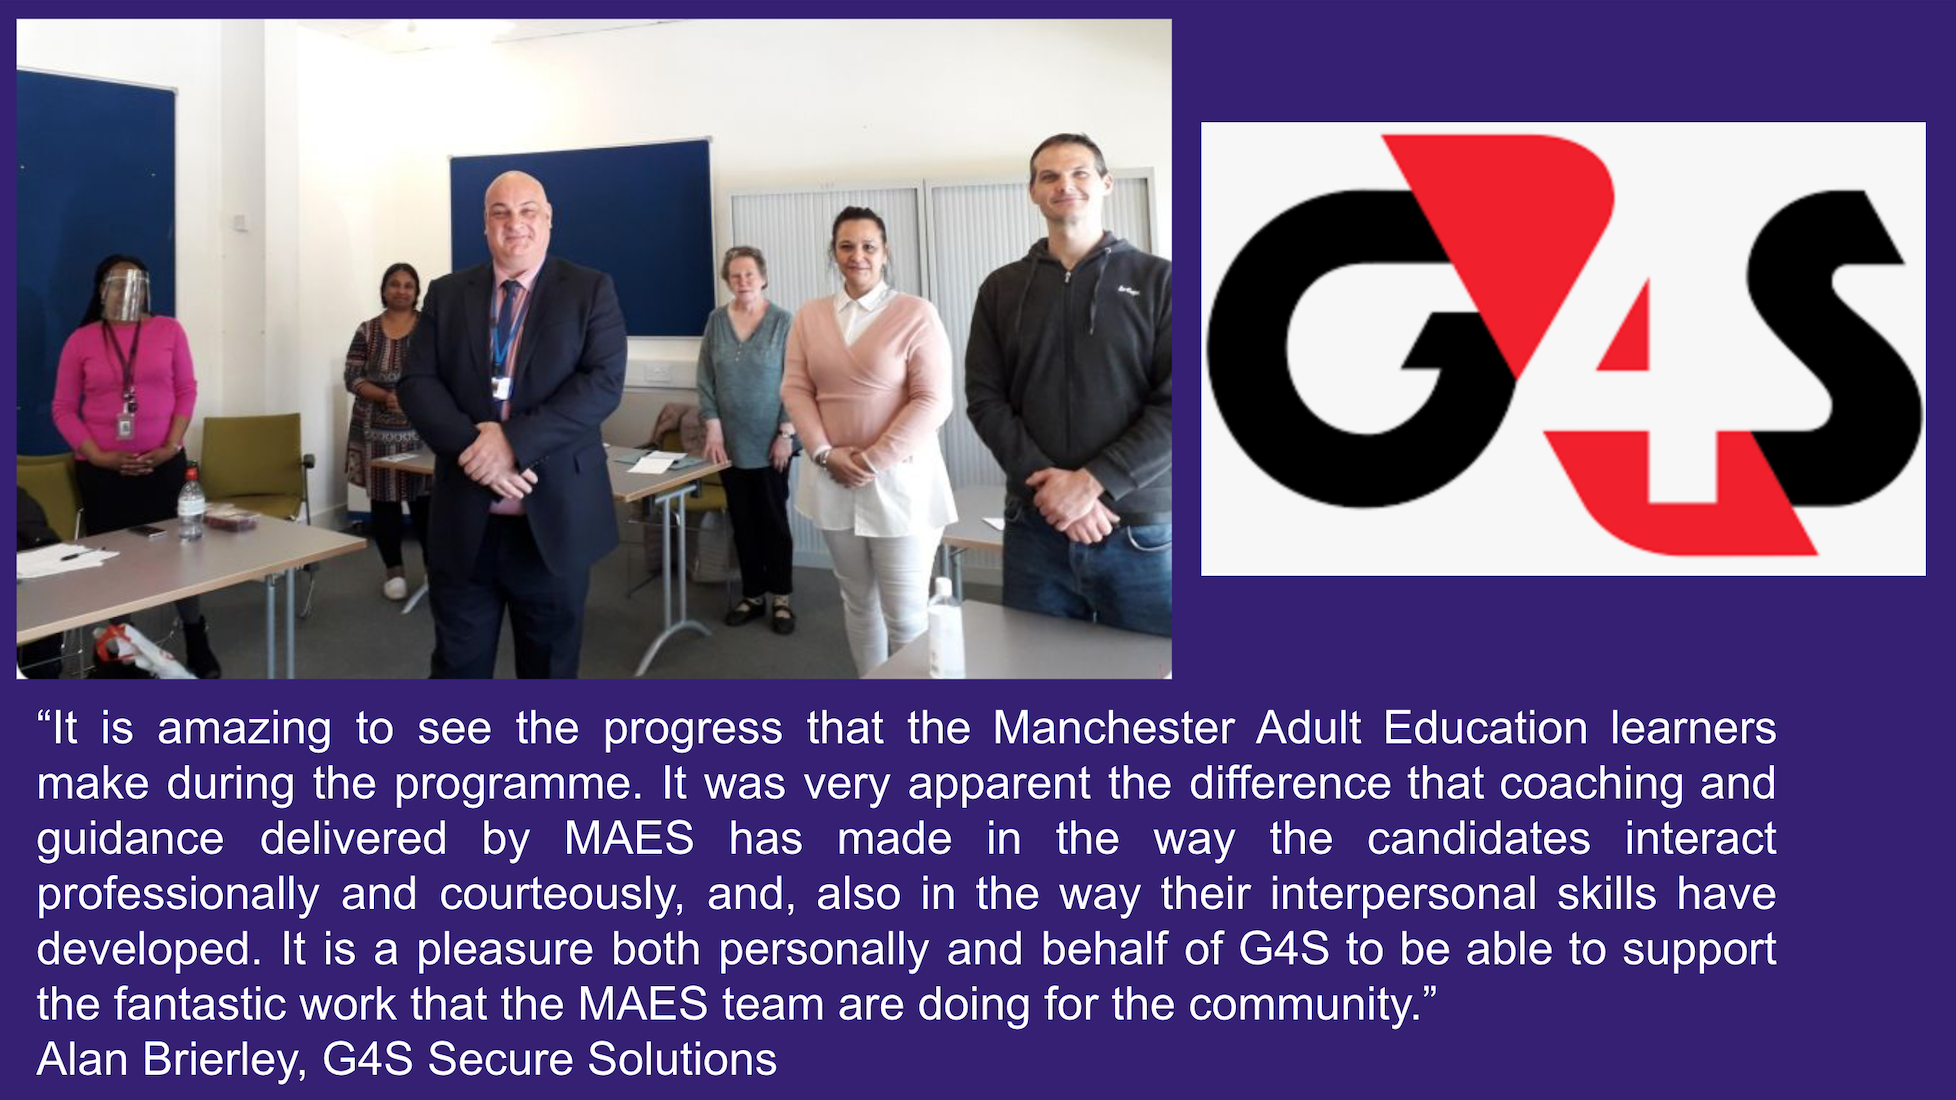 A quote from Alan Brierley of G4S Secure Solutions: “It is amazing to see the progress that the Manchester Adult Education learners make during the programme. It was very apparent the difference that coaching and guidance delivered by MAES has made in the way the candidates interact professionally and courteously, and, also in the way their interpersonal skills have developed. It is a pleasure both personally and behalf of G4S to be able to support the fantastic work that the MAES team are doing for the community.”  Alan Brierley, G4S Secure Solutions